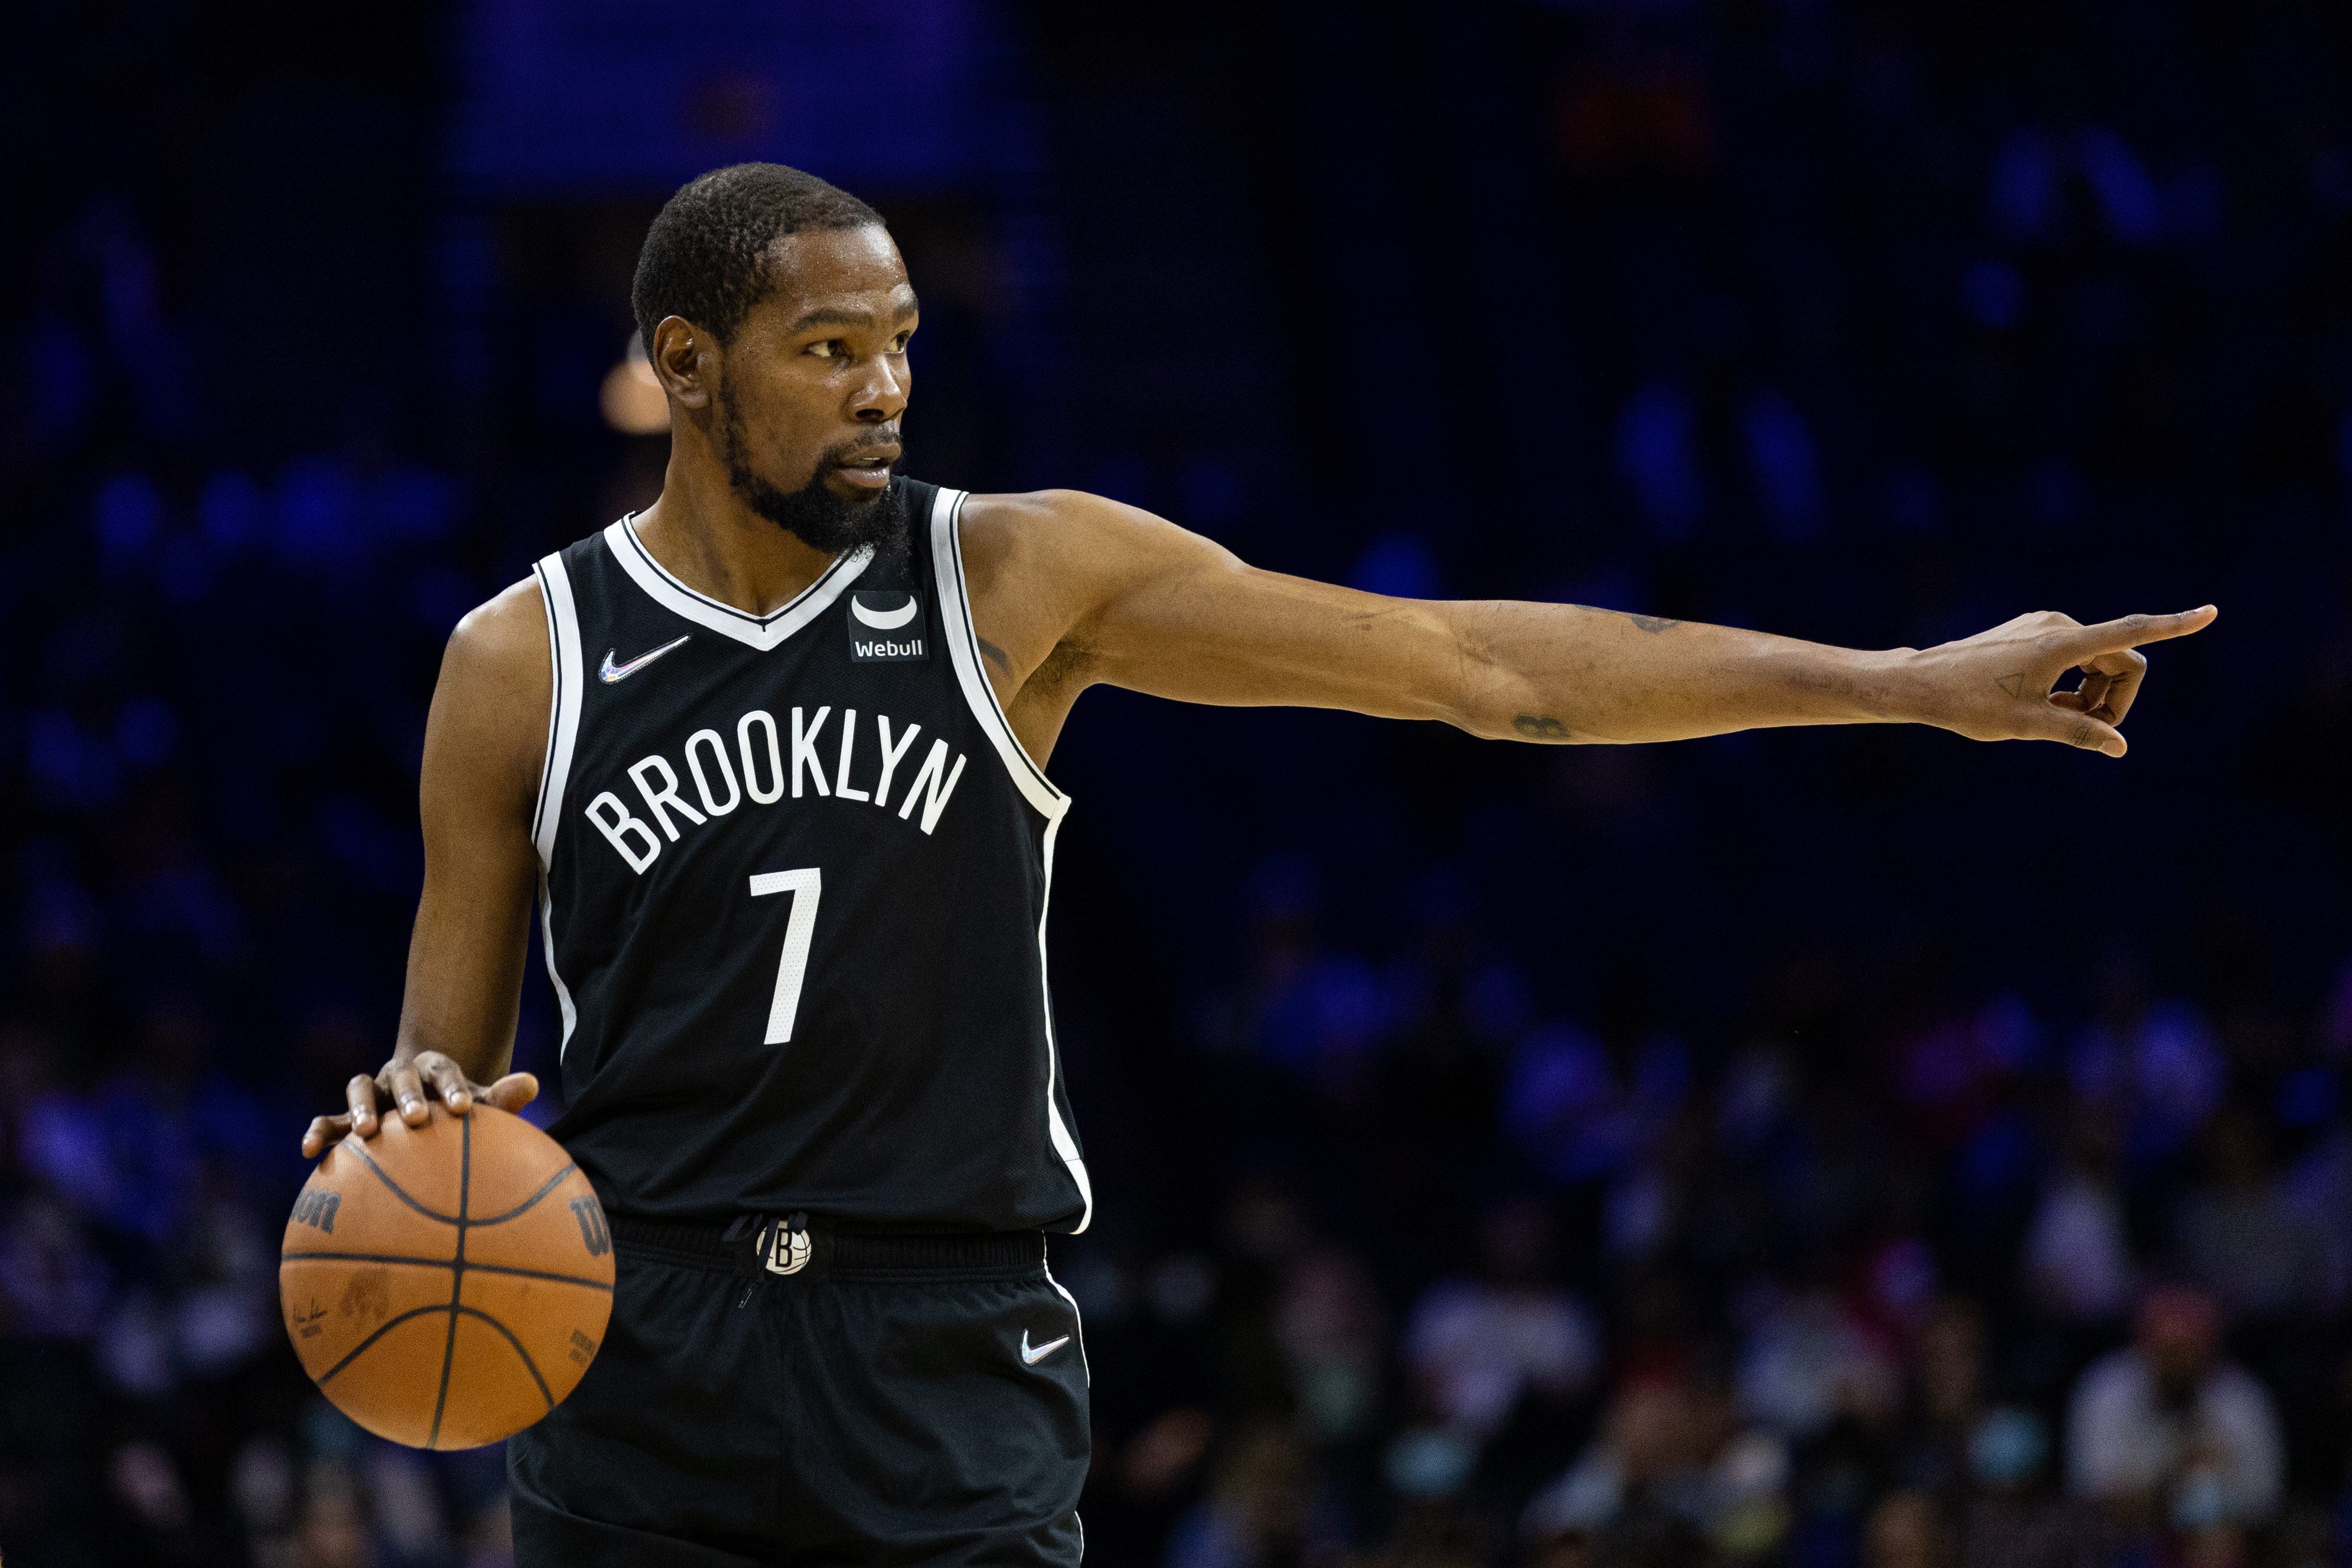 Nets stars Kevin Durant, Kyrie Irving enter COVID protocol